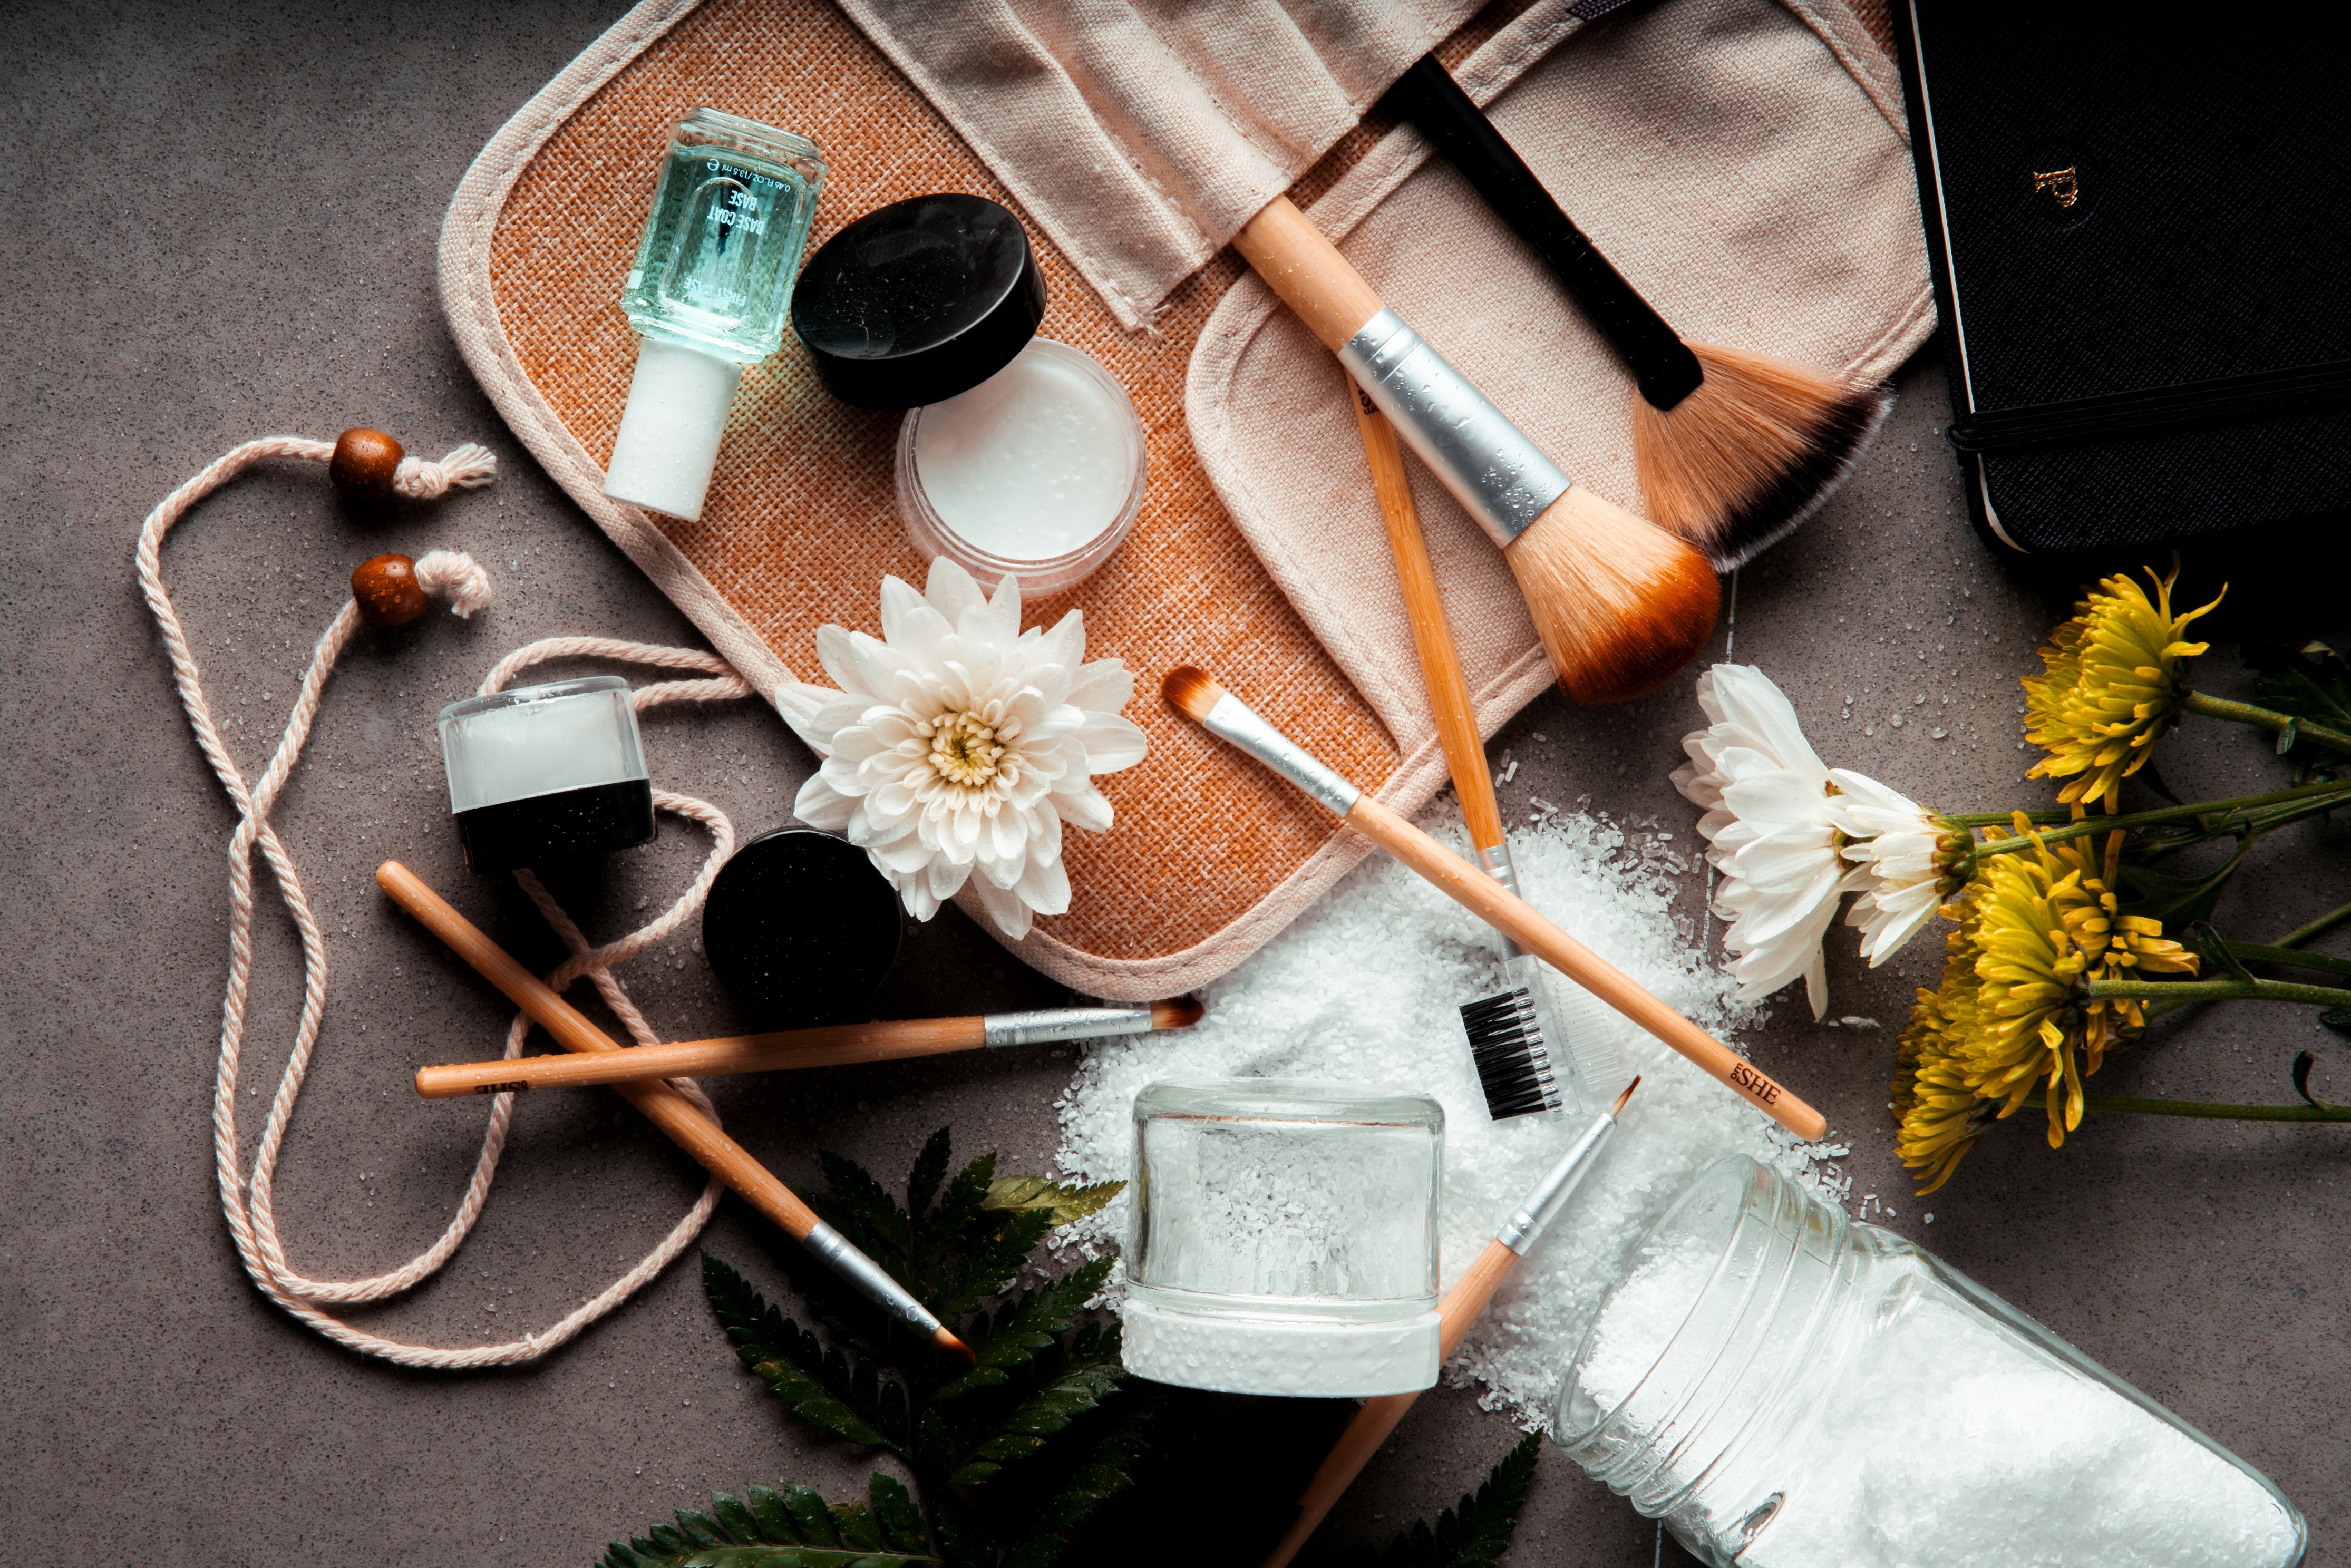 3 Toxic Skin Care Products to Give Up in 2021